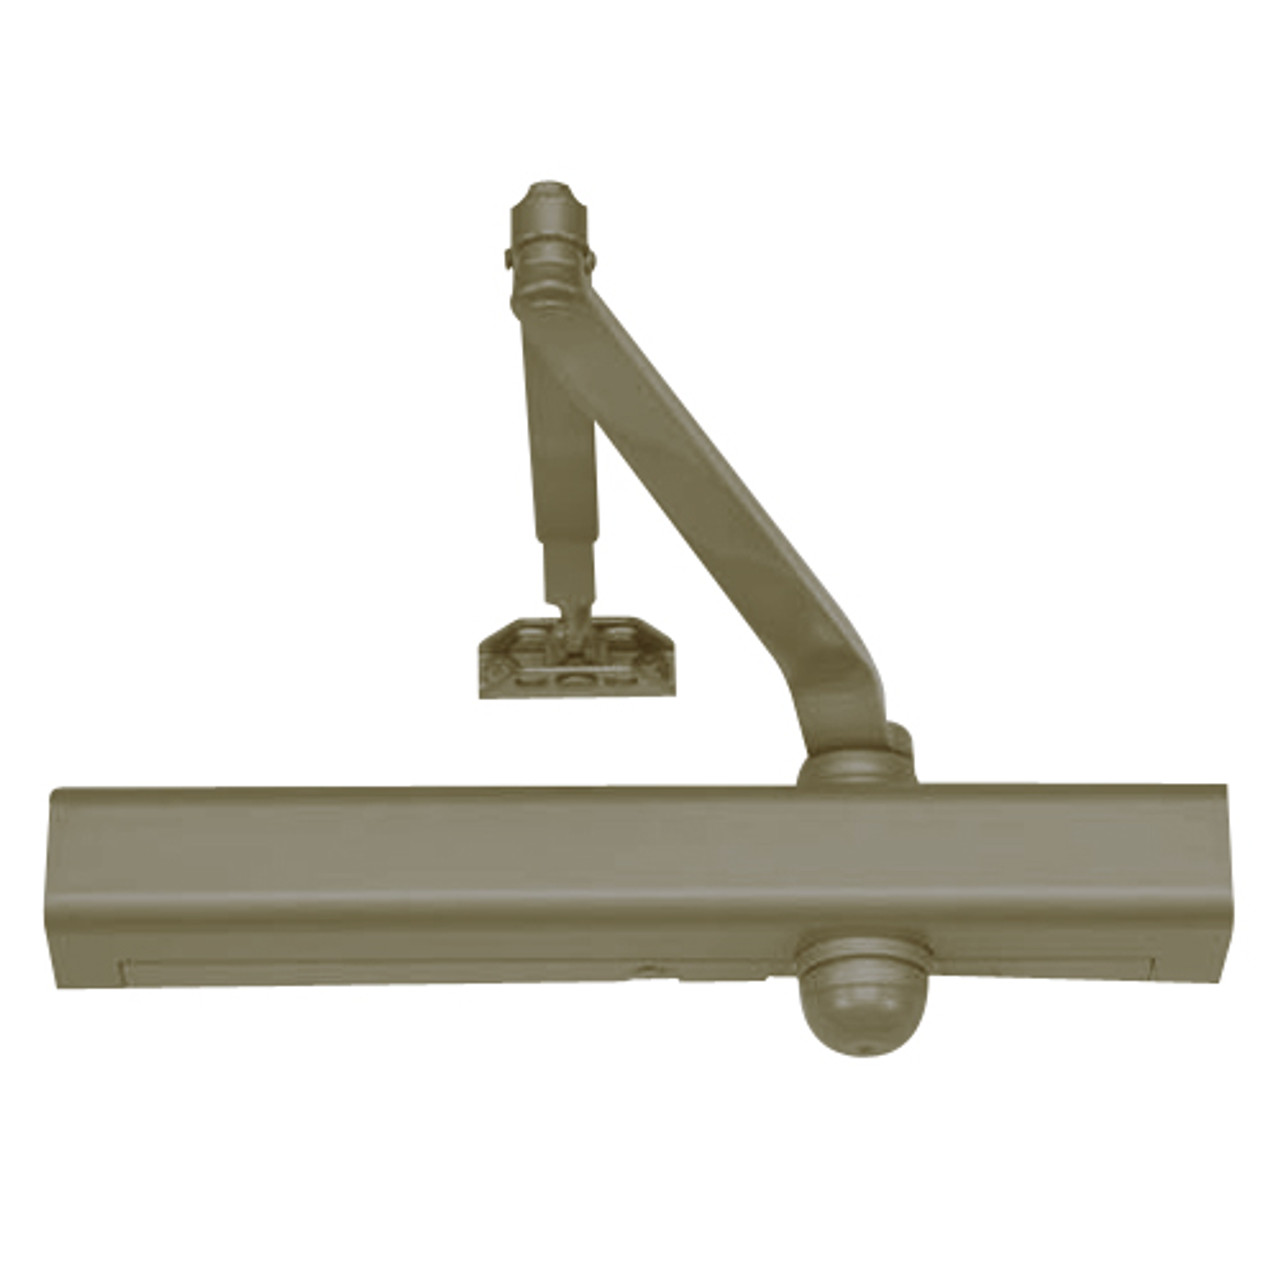 3301-694 Yale 3000 Series Architectural Door Closer with Regular Parallel and Top Jamb to 3" Reveal in Medium Bronze